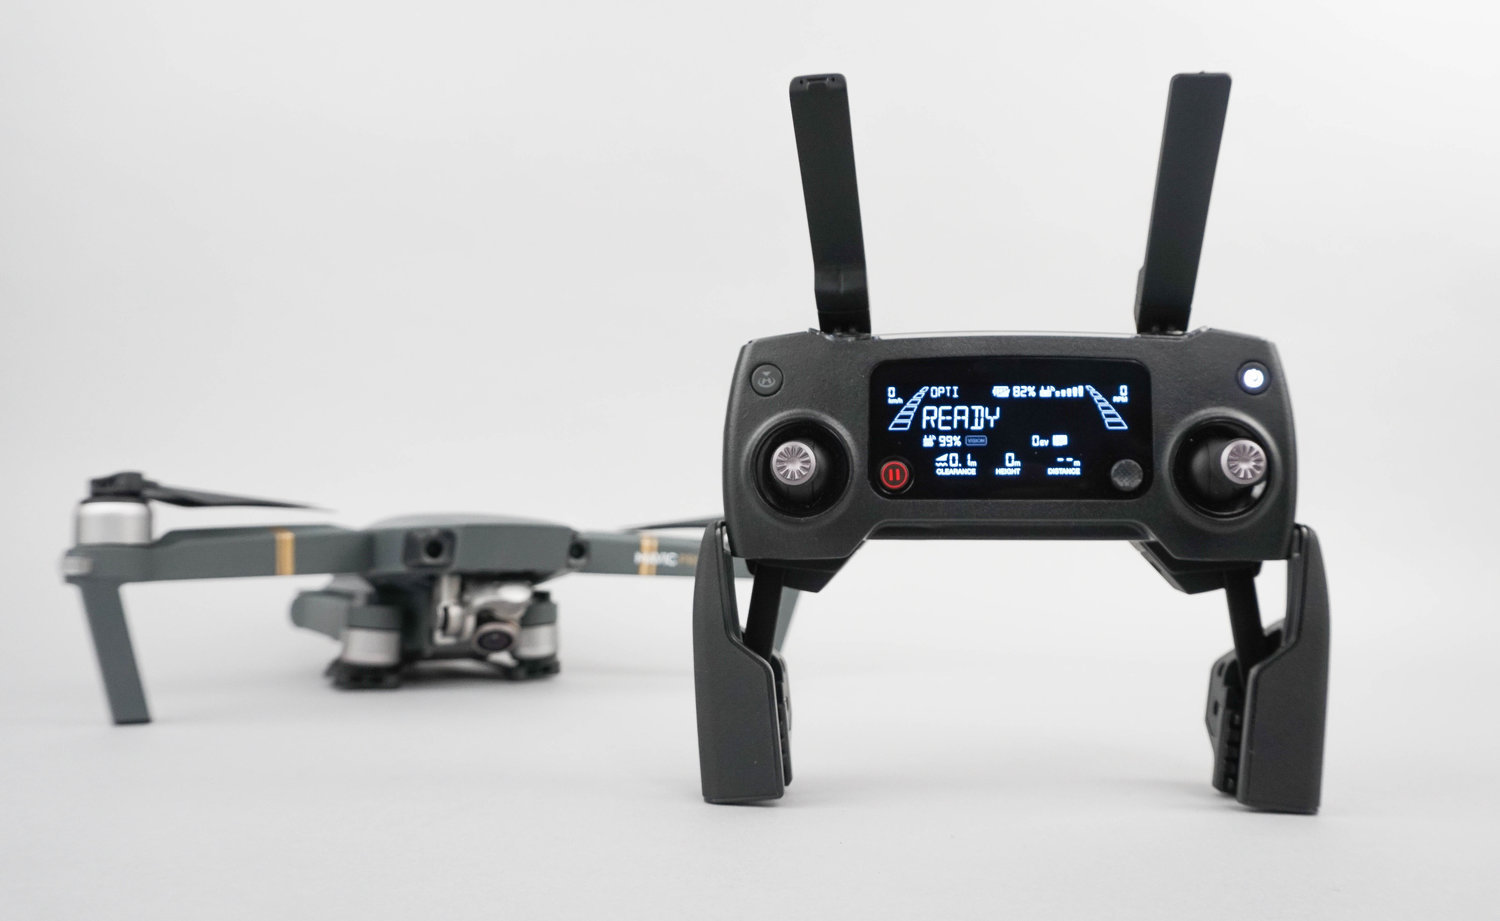 The controller is designed to give operators the most user-friendly experience possibly when flying their drone. The remote features a built-in LCD telemetry screen display, as well as dedicated buttons for flight modes such as Return-to-Home, and a pause/play button. The OcuSync video transmission system gives the Mavic Pro a range of up to 7 km with an increased resistance to any interference. At a short range, the Mavic can stream live footage at a resolution of 1080p, and can allow photo and video downloads at 40 MB/s. Users can also easily switch between 1080p and 720p manually. 